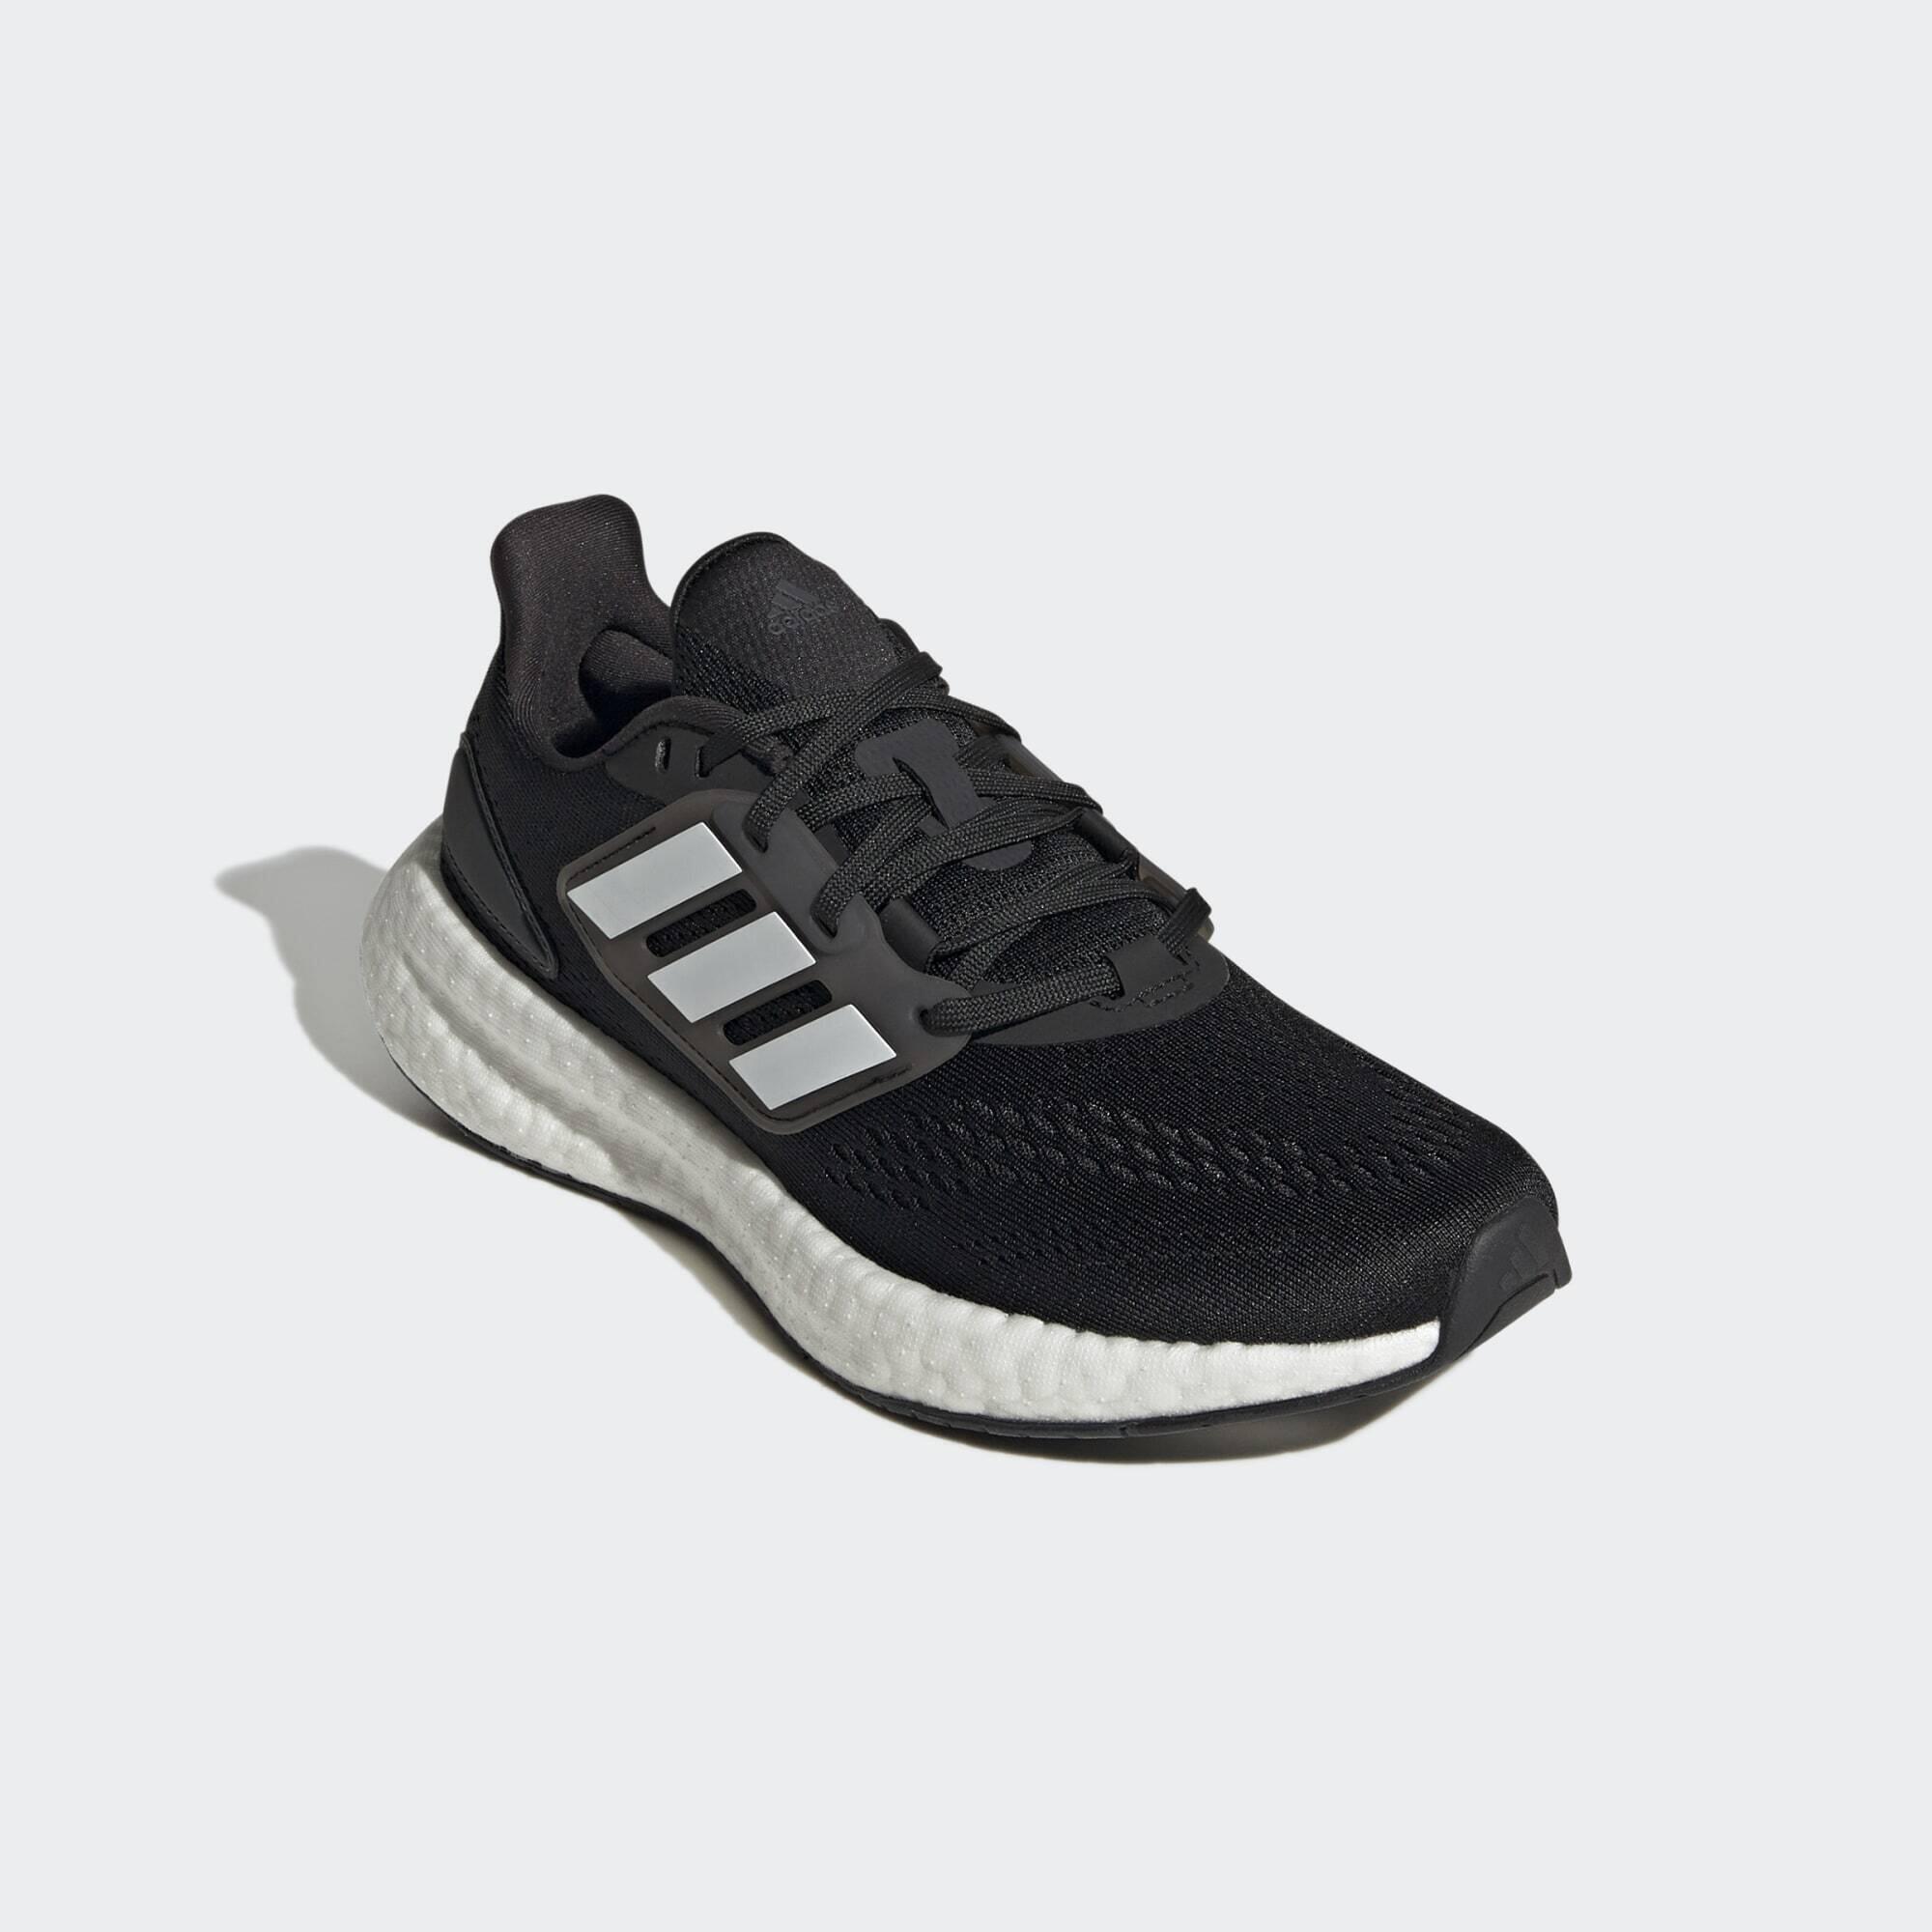 Pureboost 22 Shoes 5/7